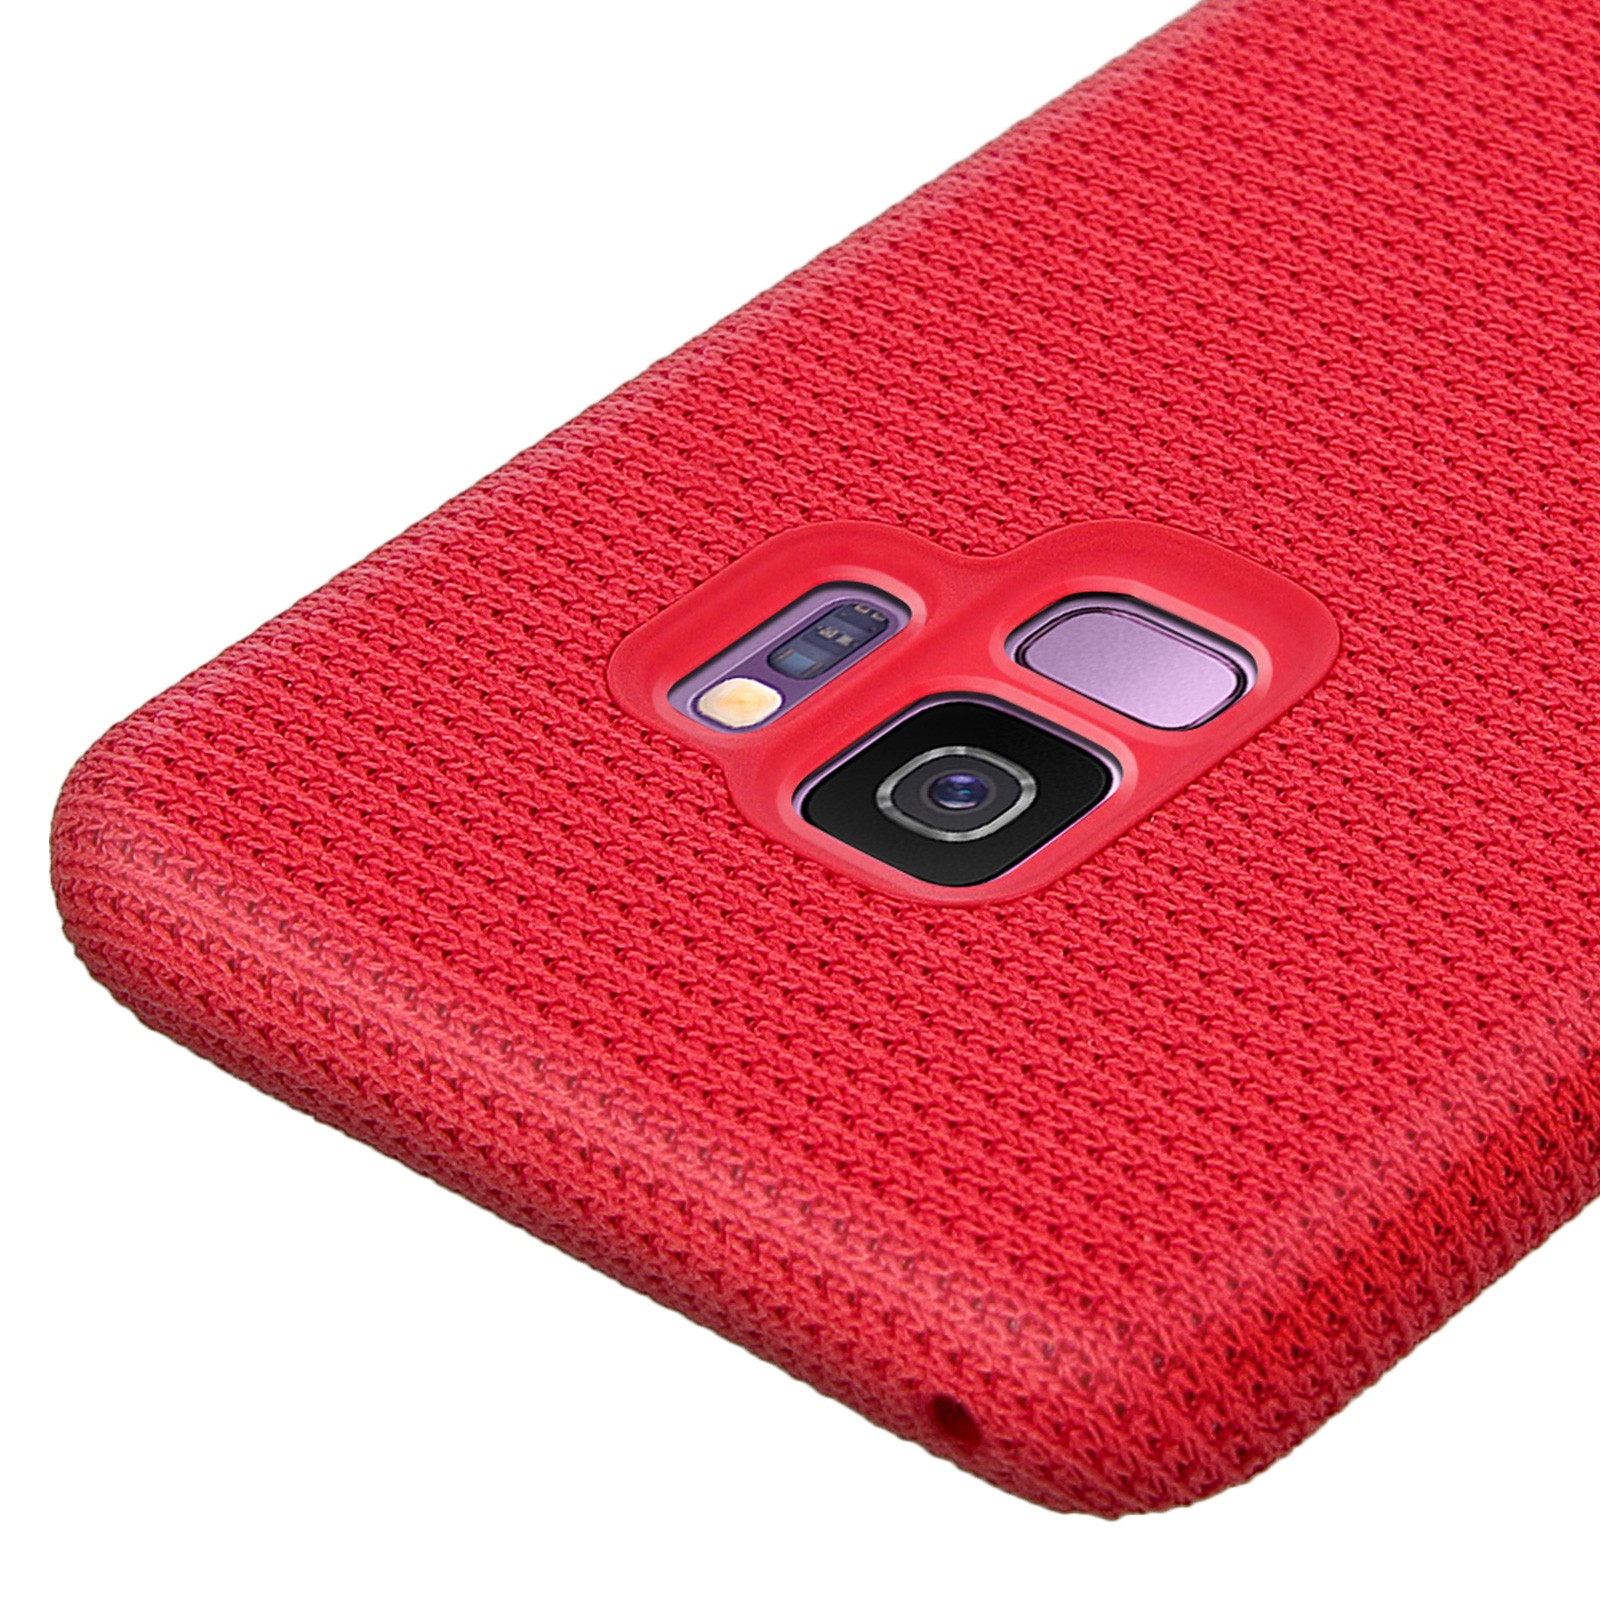 SAMSUNG Hyperknit Cover Keine Angabe S9 - Bookcover, for Samsung, Galaxy Galaxy Case (Red), S9